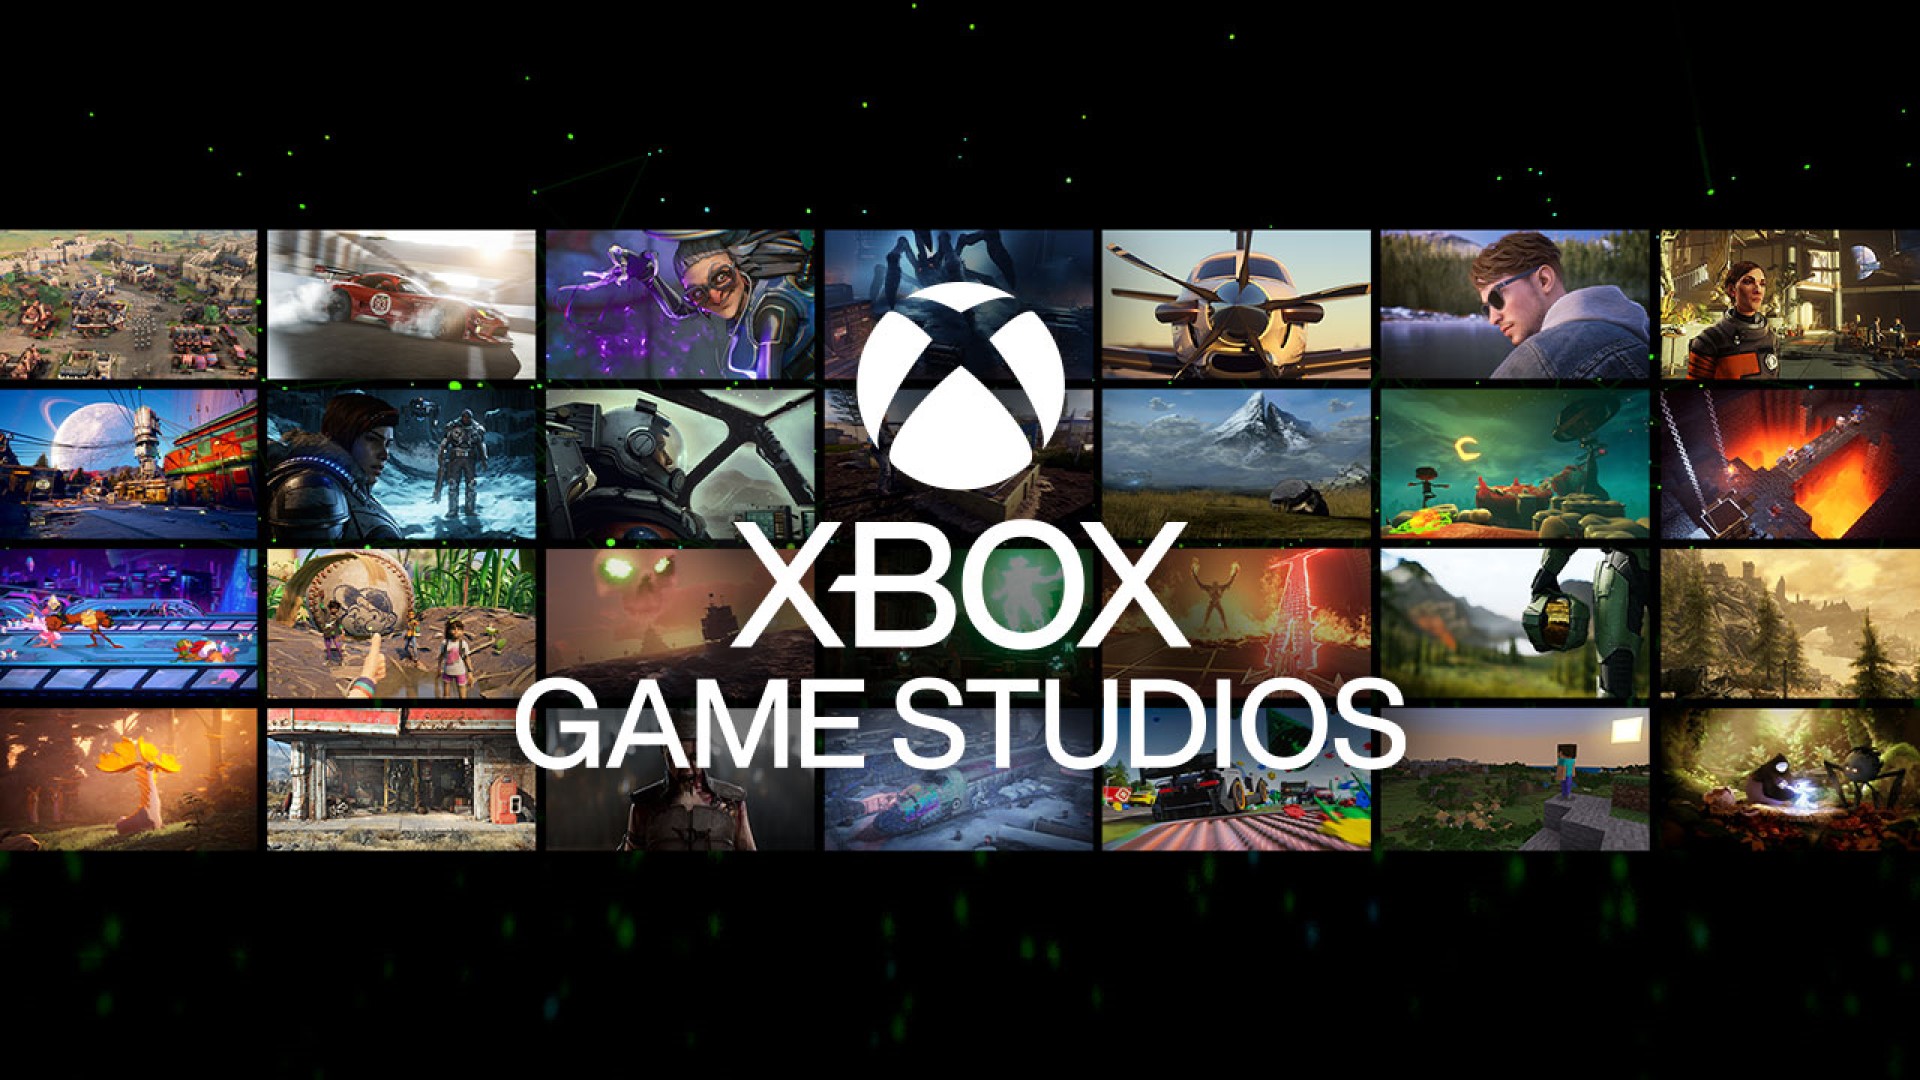 Xbox Game Studios is Working on “Over a Dozen Games” with External Partners